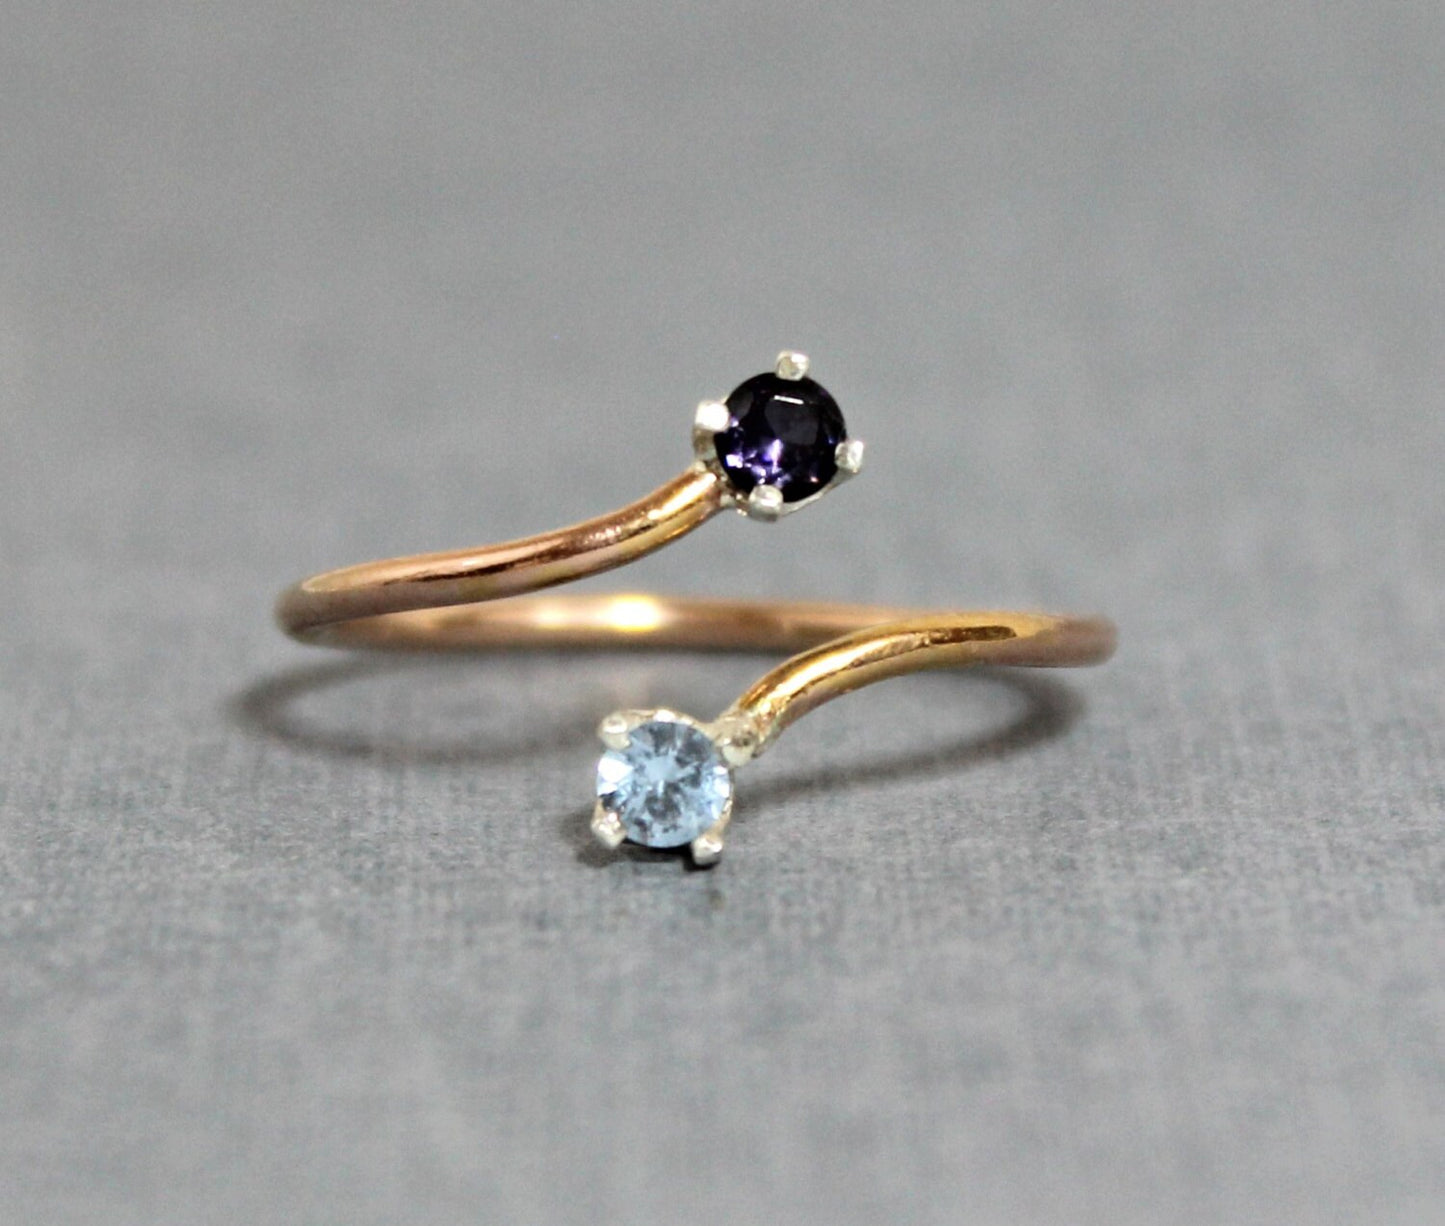 Personalized Dual Birthstone Ring - Amethyst and Aquamarine Cubic Zirconia Ring - 14K Rose Gold Filled Ring -Double Birthstone Ring